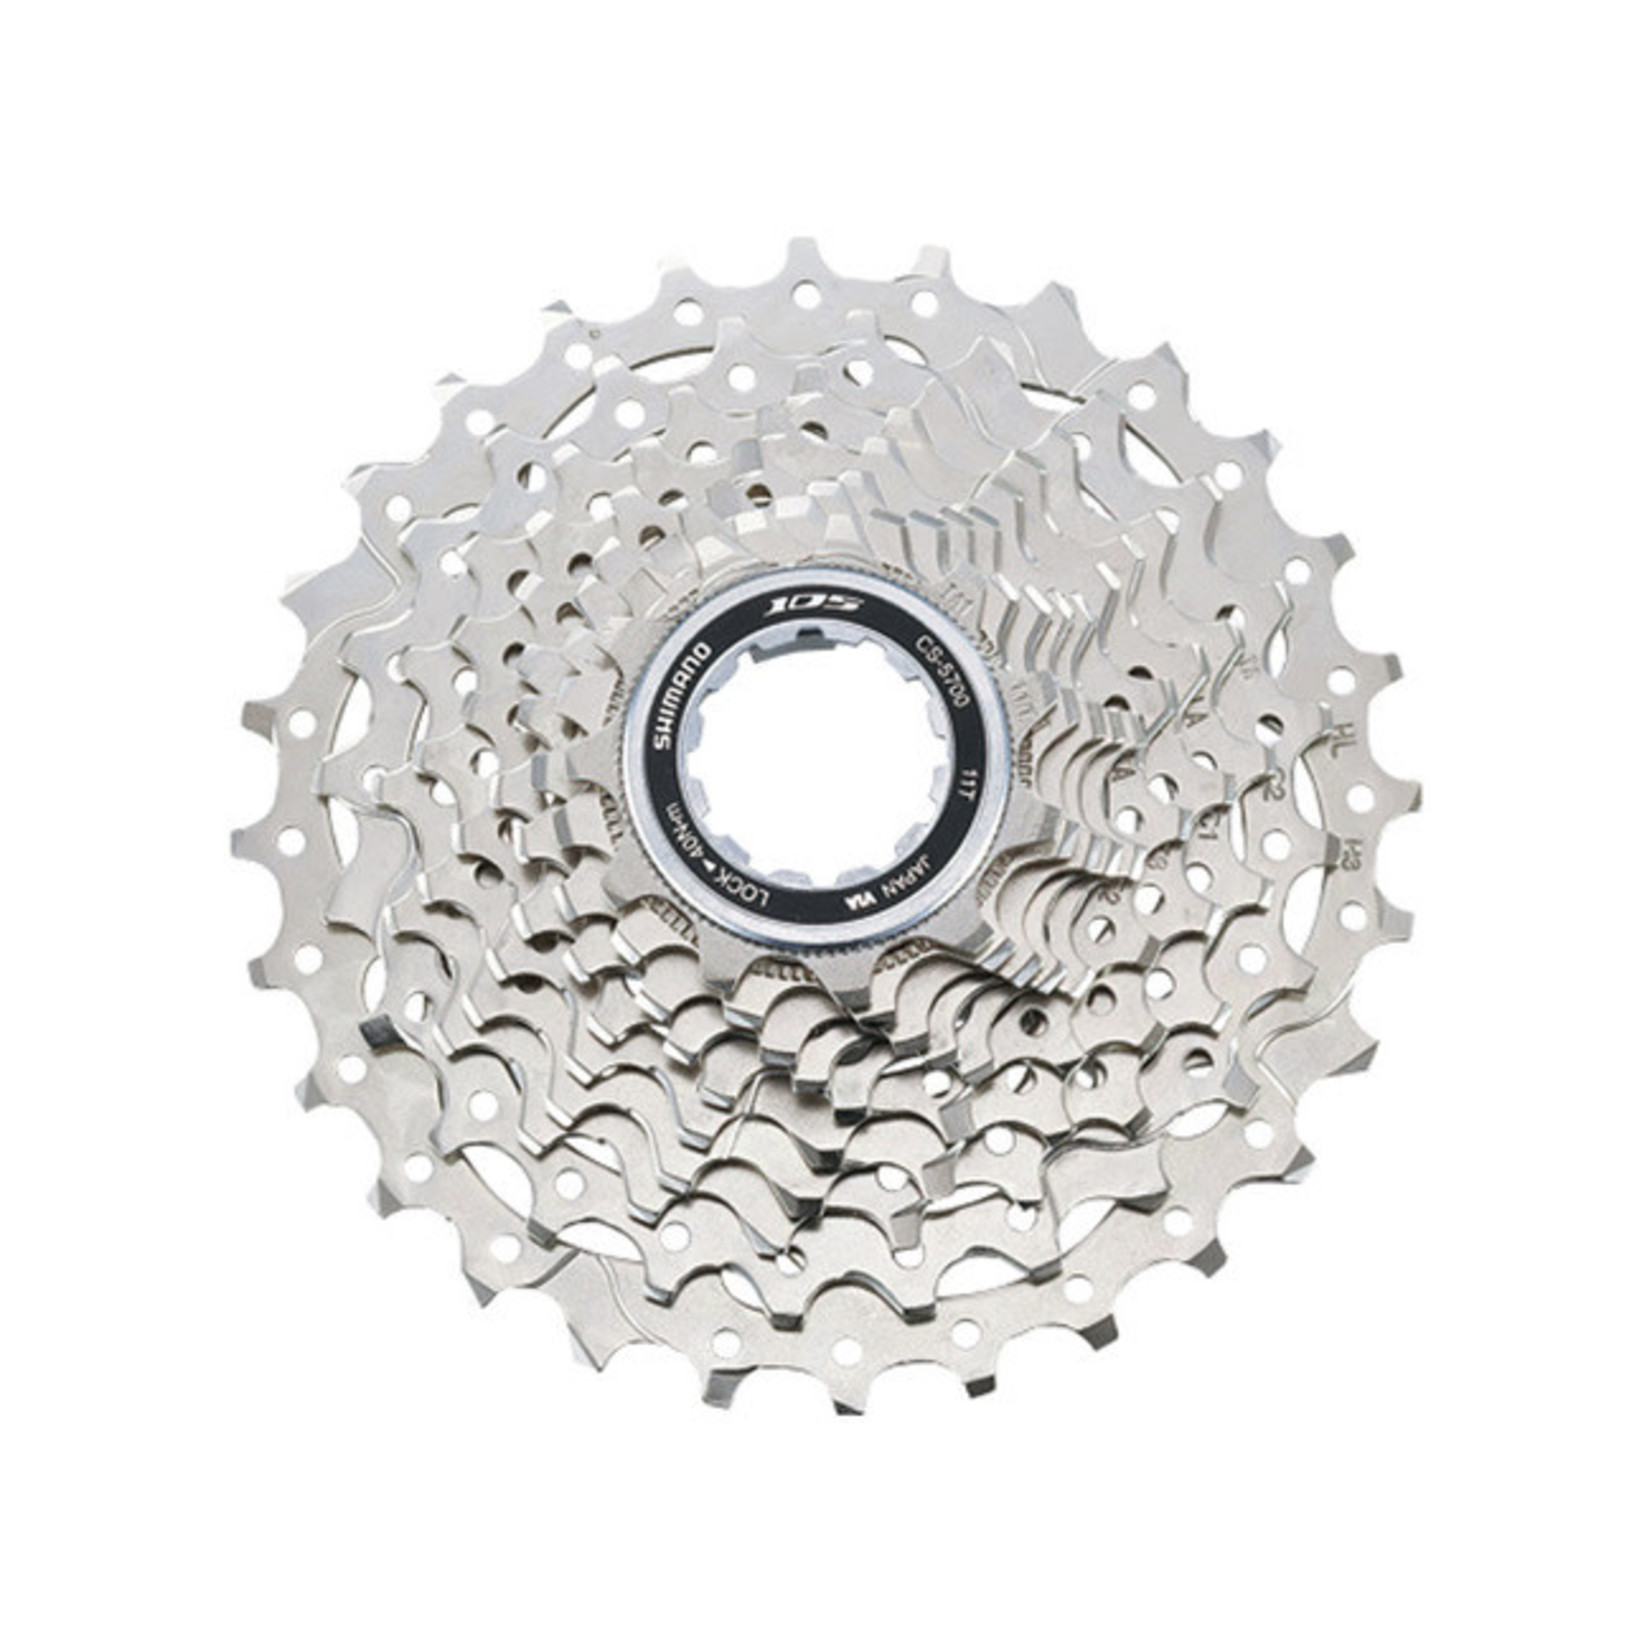 Shimano CASSETTE SPROCKET, CS-5700, 105 10-SPEED 11-12-13-14-15-17-19-21-24-28T 1MM SPACER INCLUDED